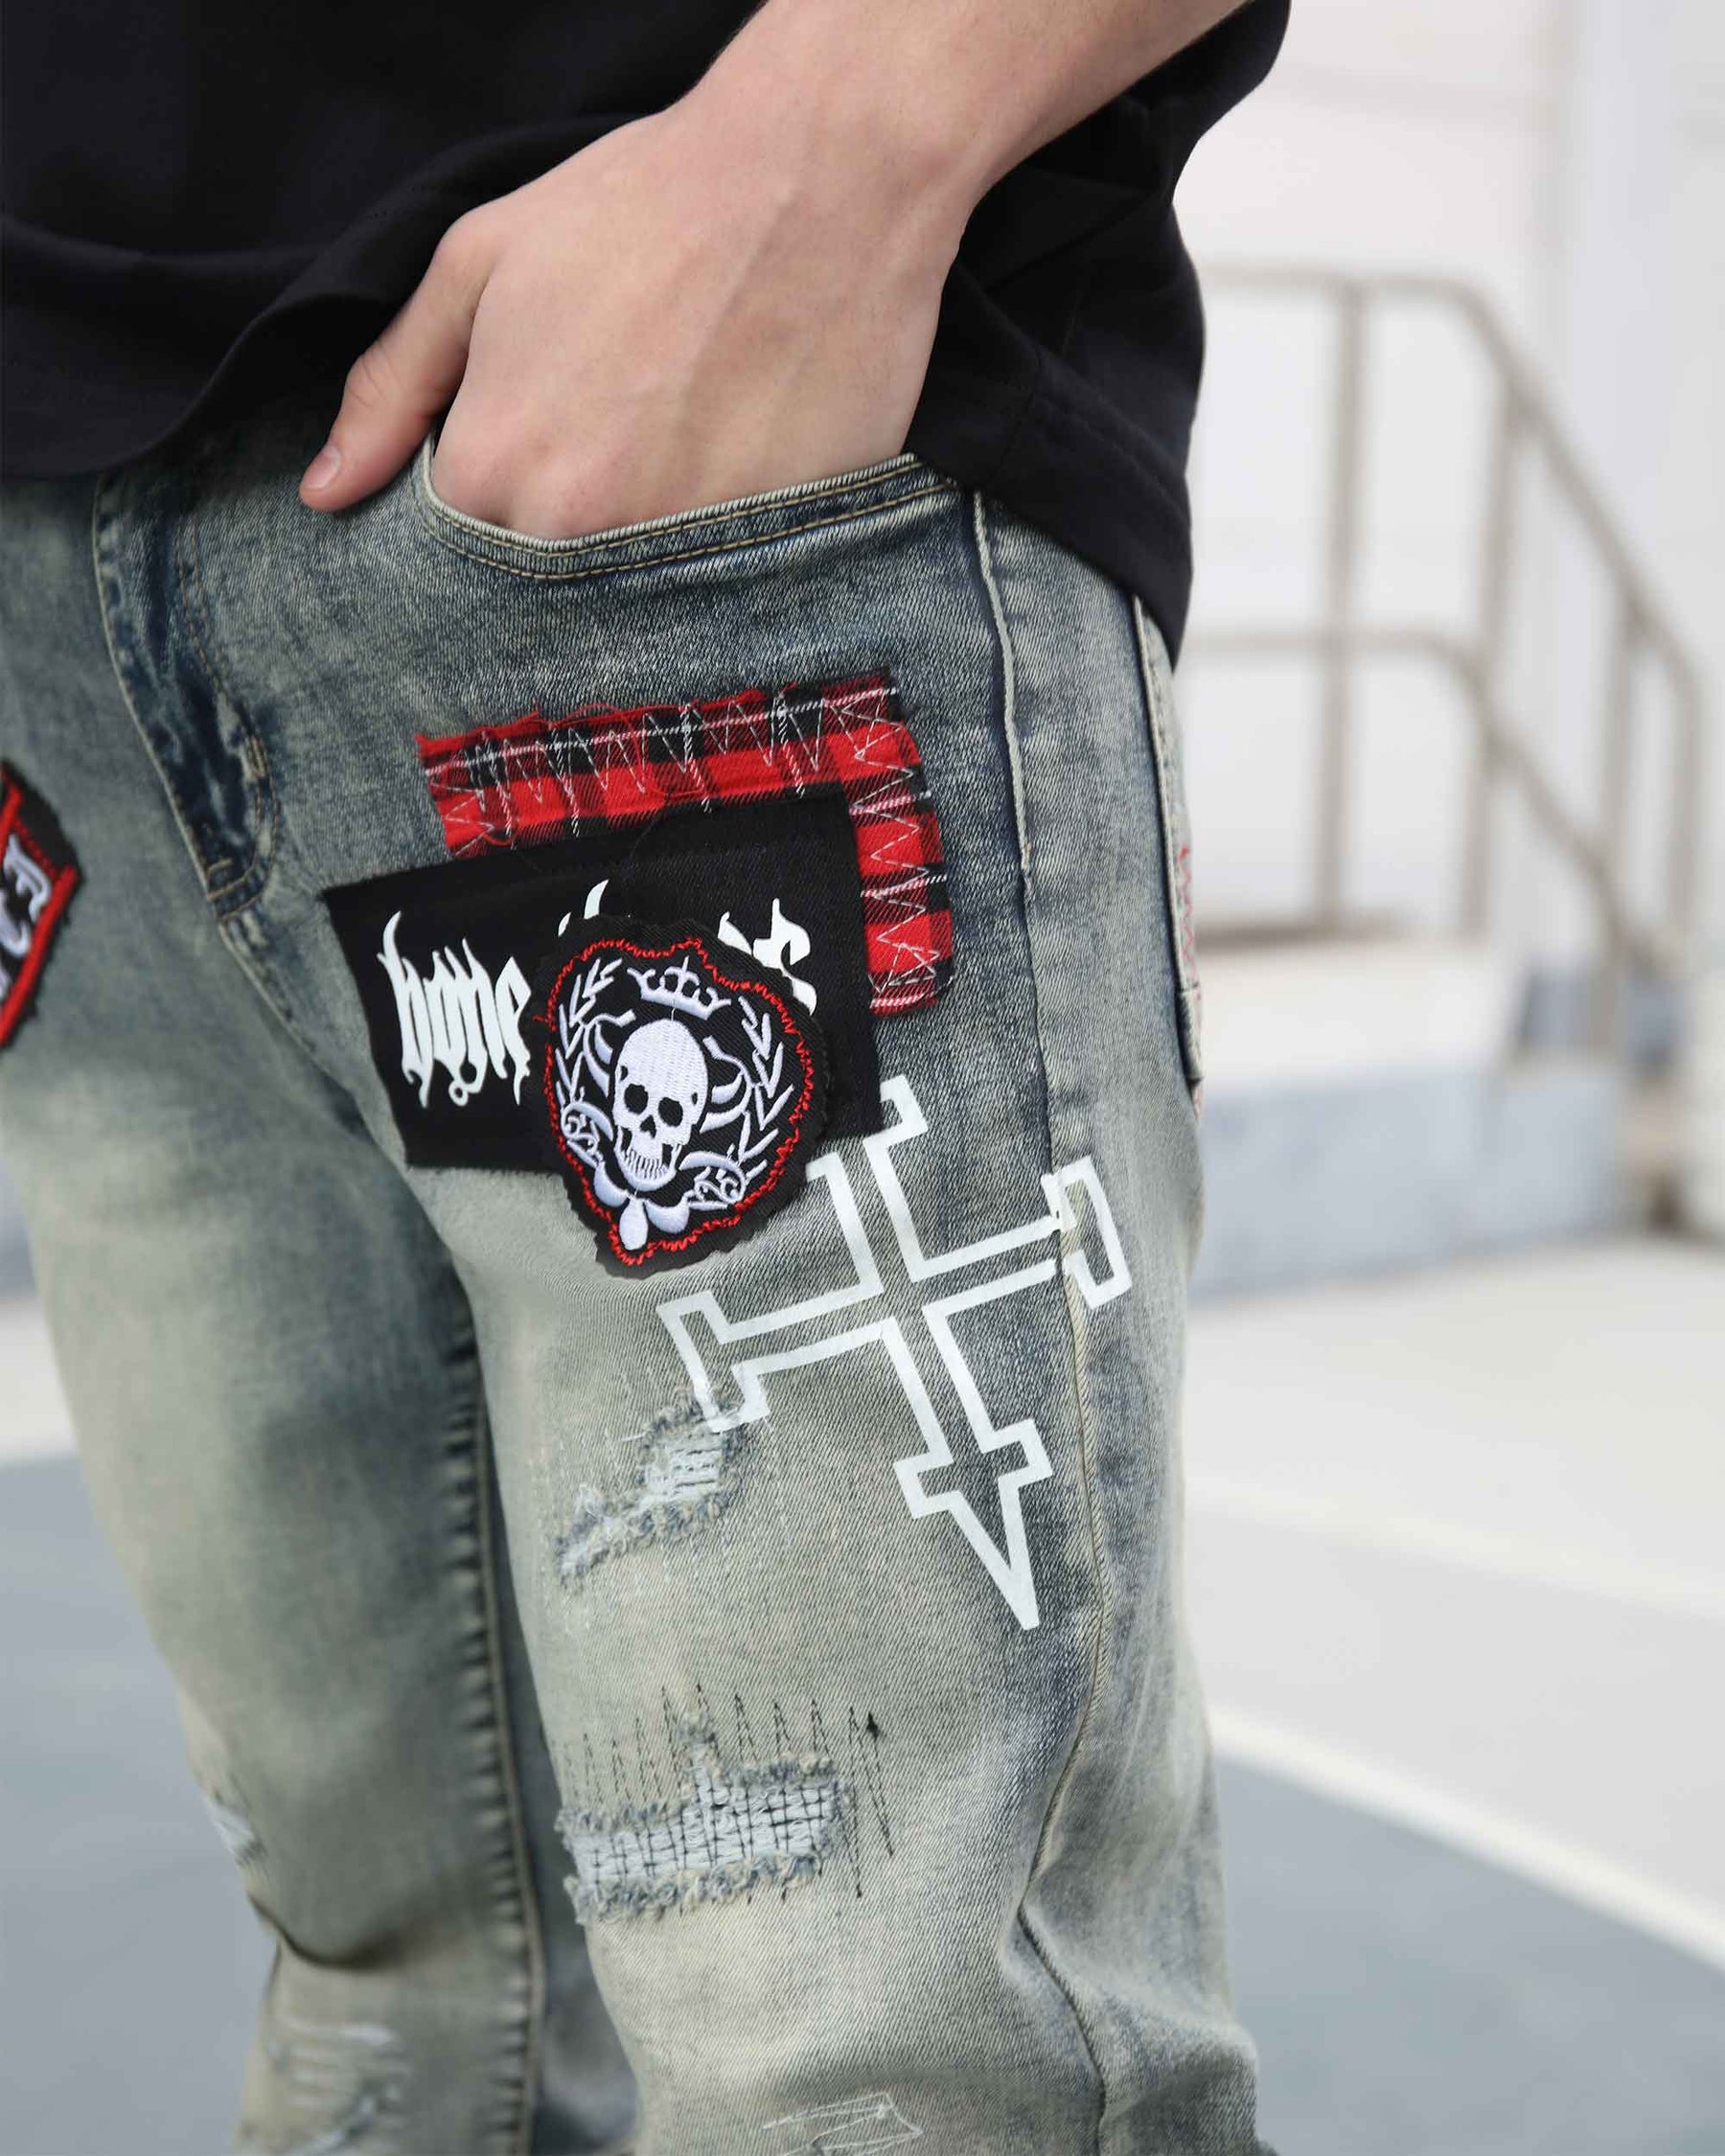 Blue Straight Leg Ripped Jeans with Graphic Print and Personalized Skull Emblem